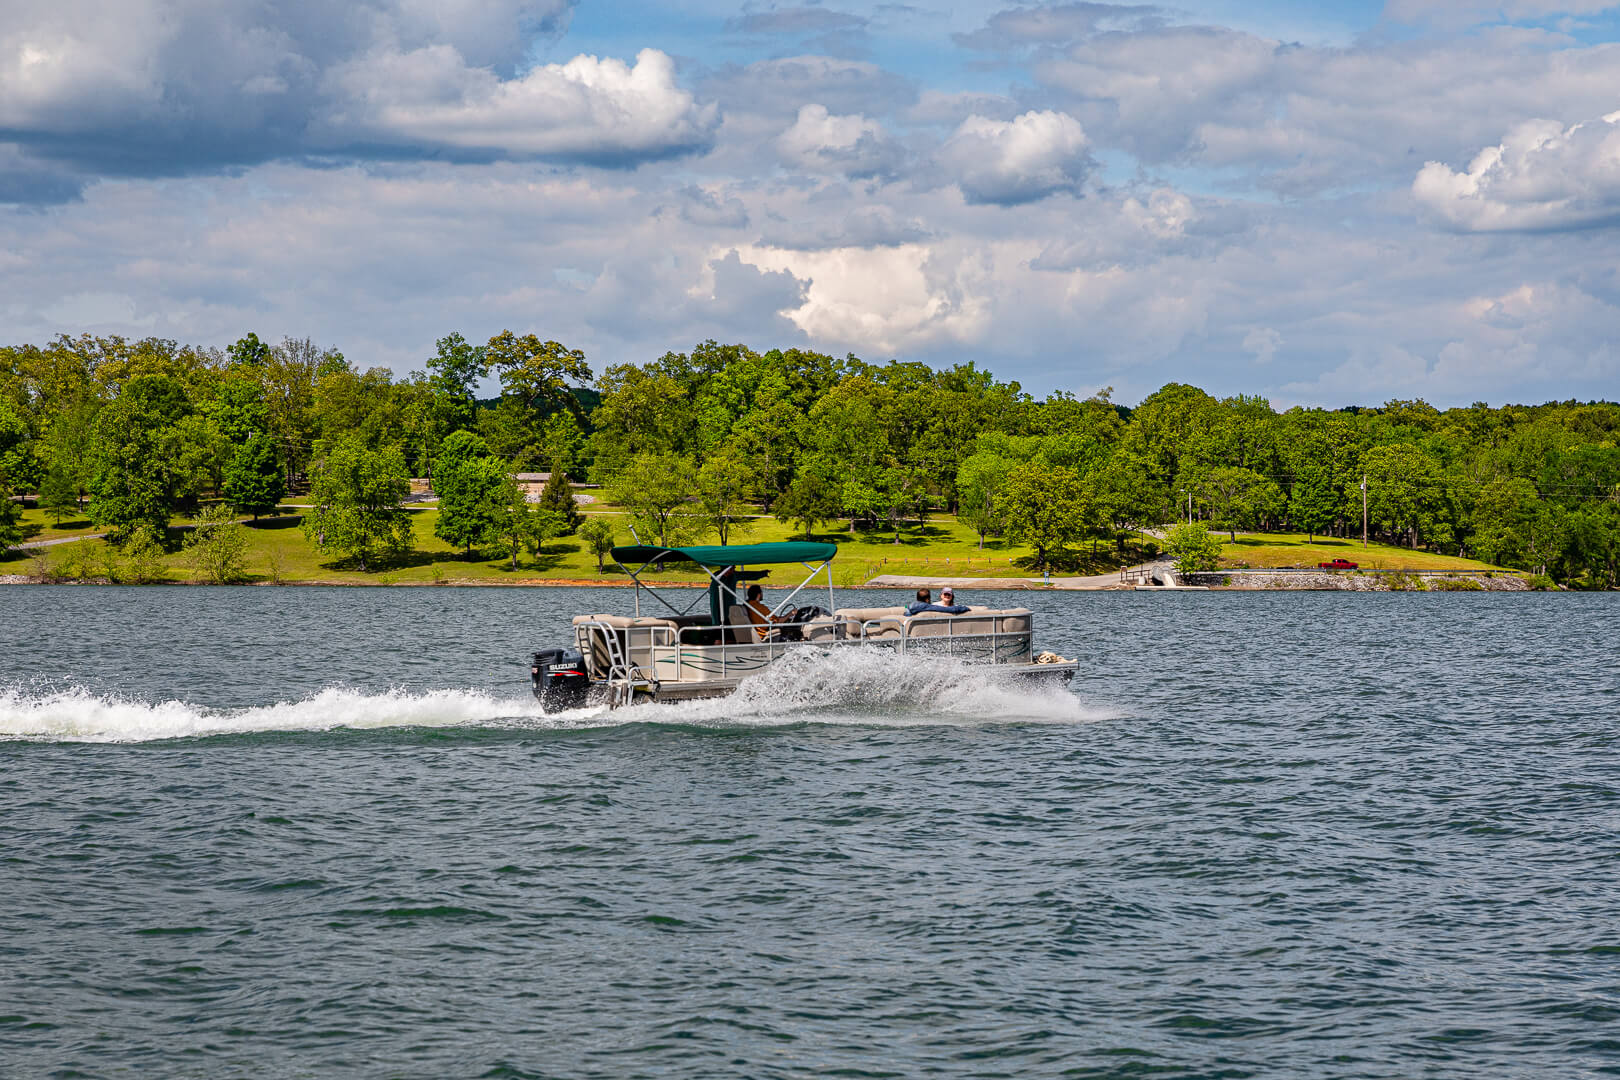 Our pontoons are a great way to enjoy the lake.